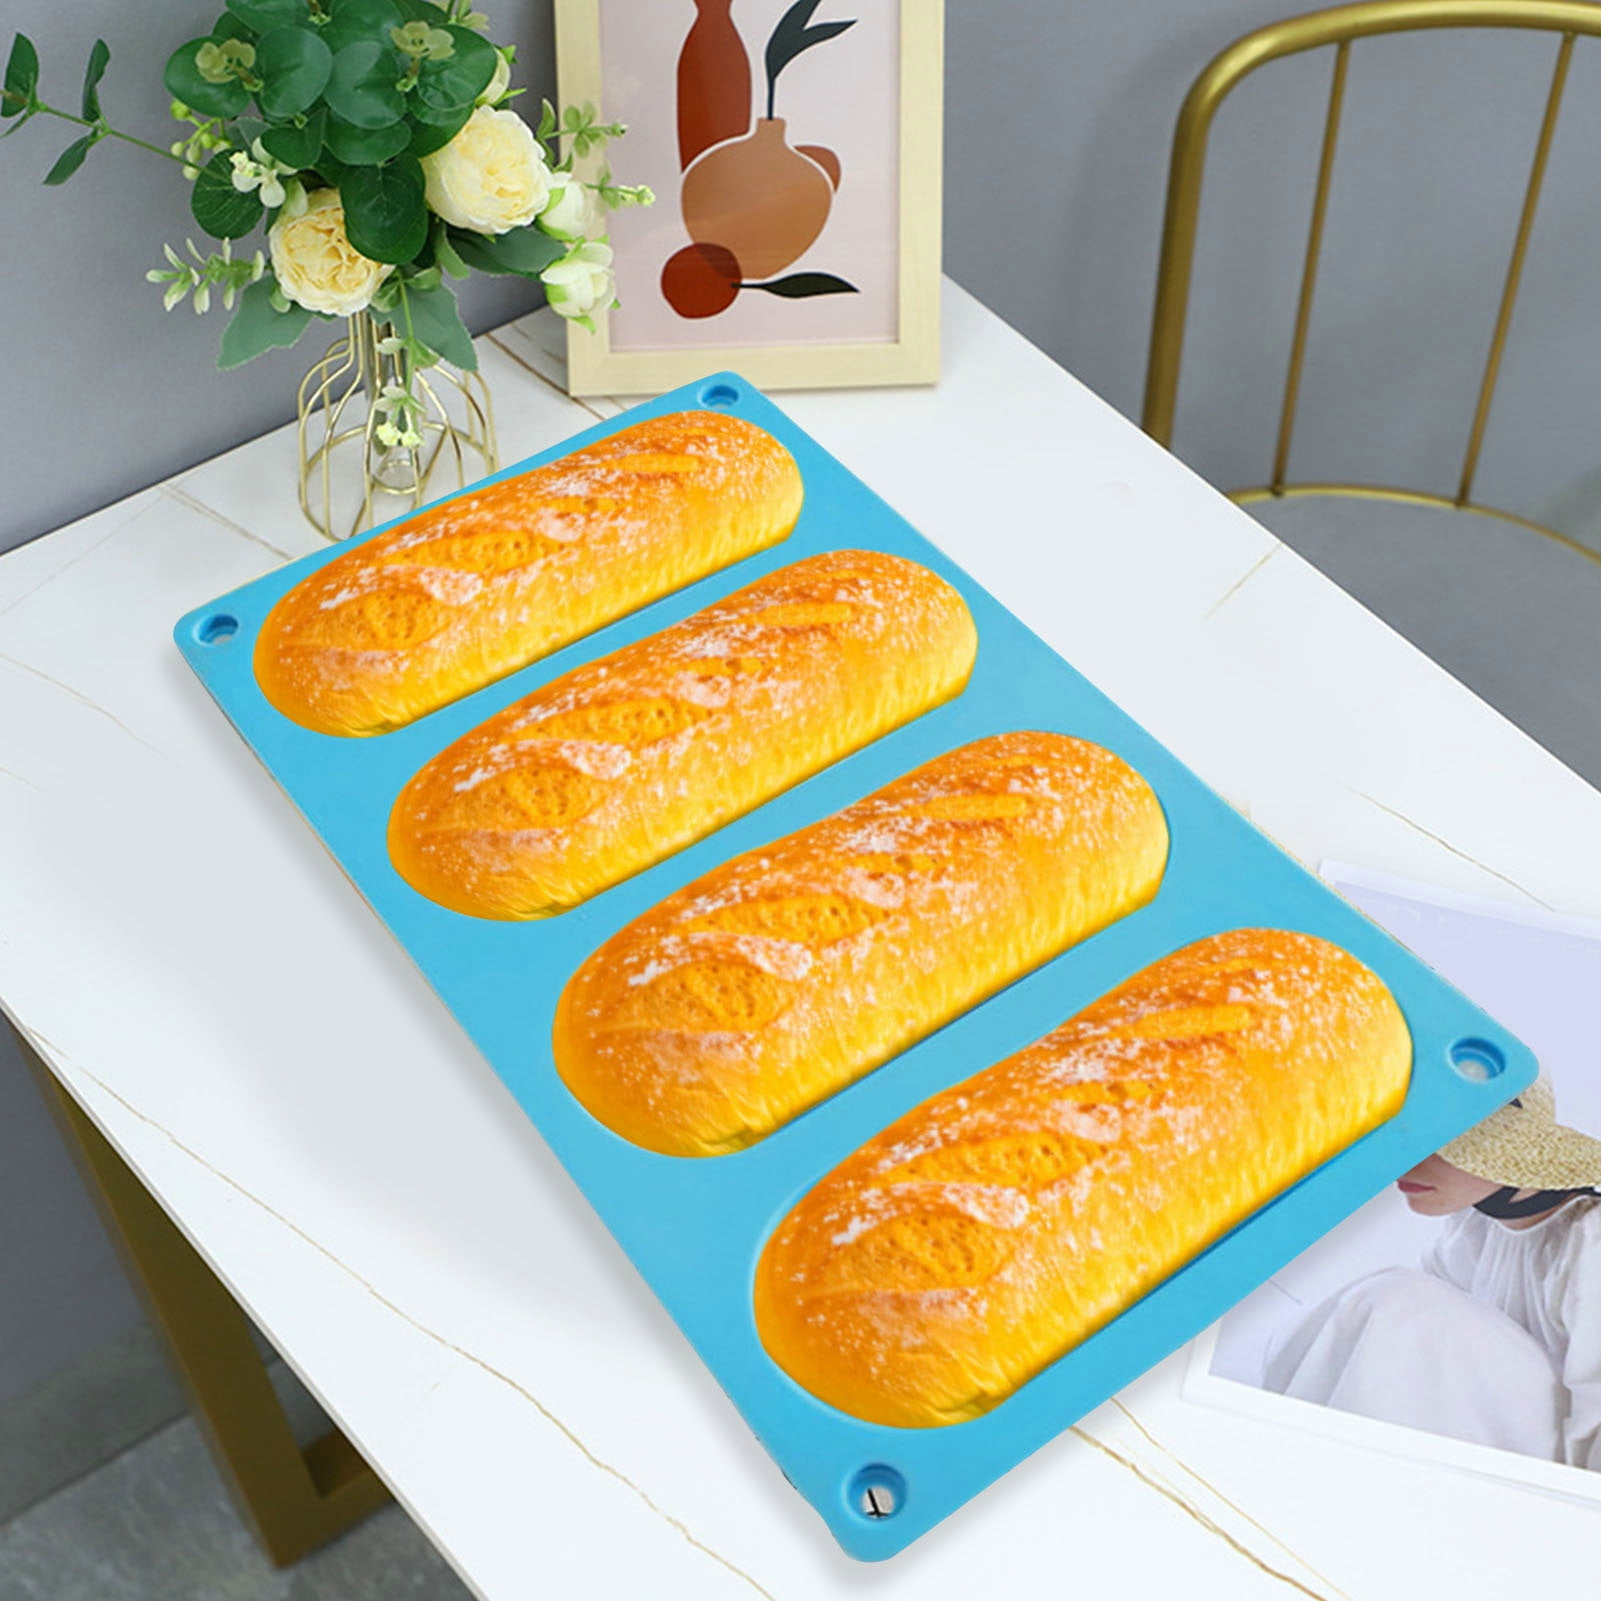 FETESUR Silicone Perforated Bread Mold for Baking, 12 Individual Oblong  Baking Forms, Hot Dog Bun Mold, Silicone Molds for Making Crispy Bread  Rolls